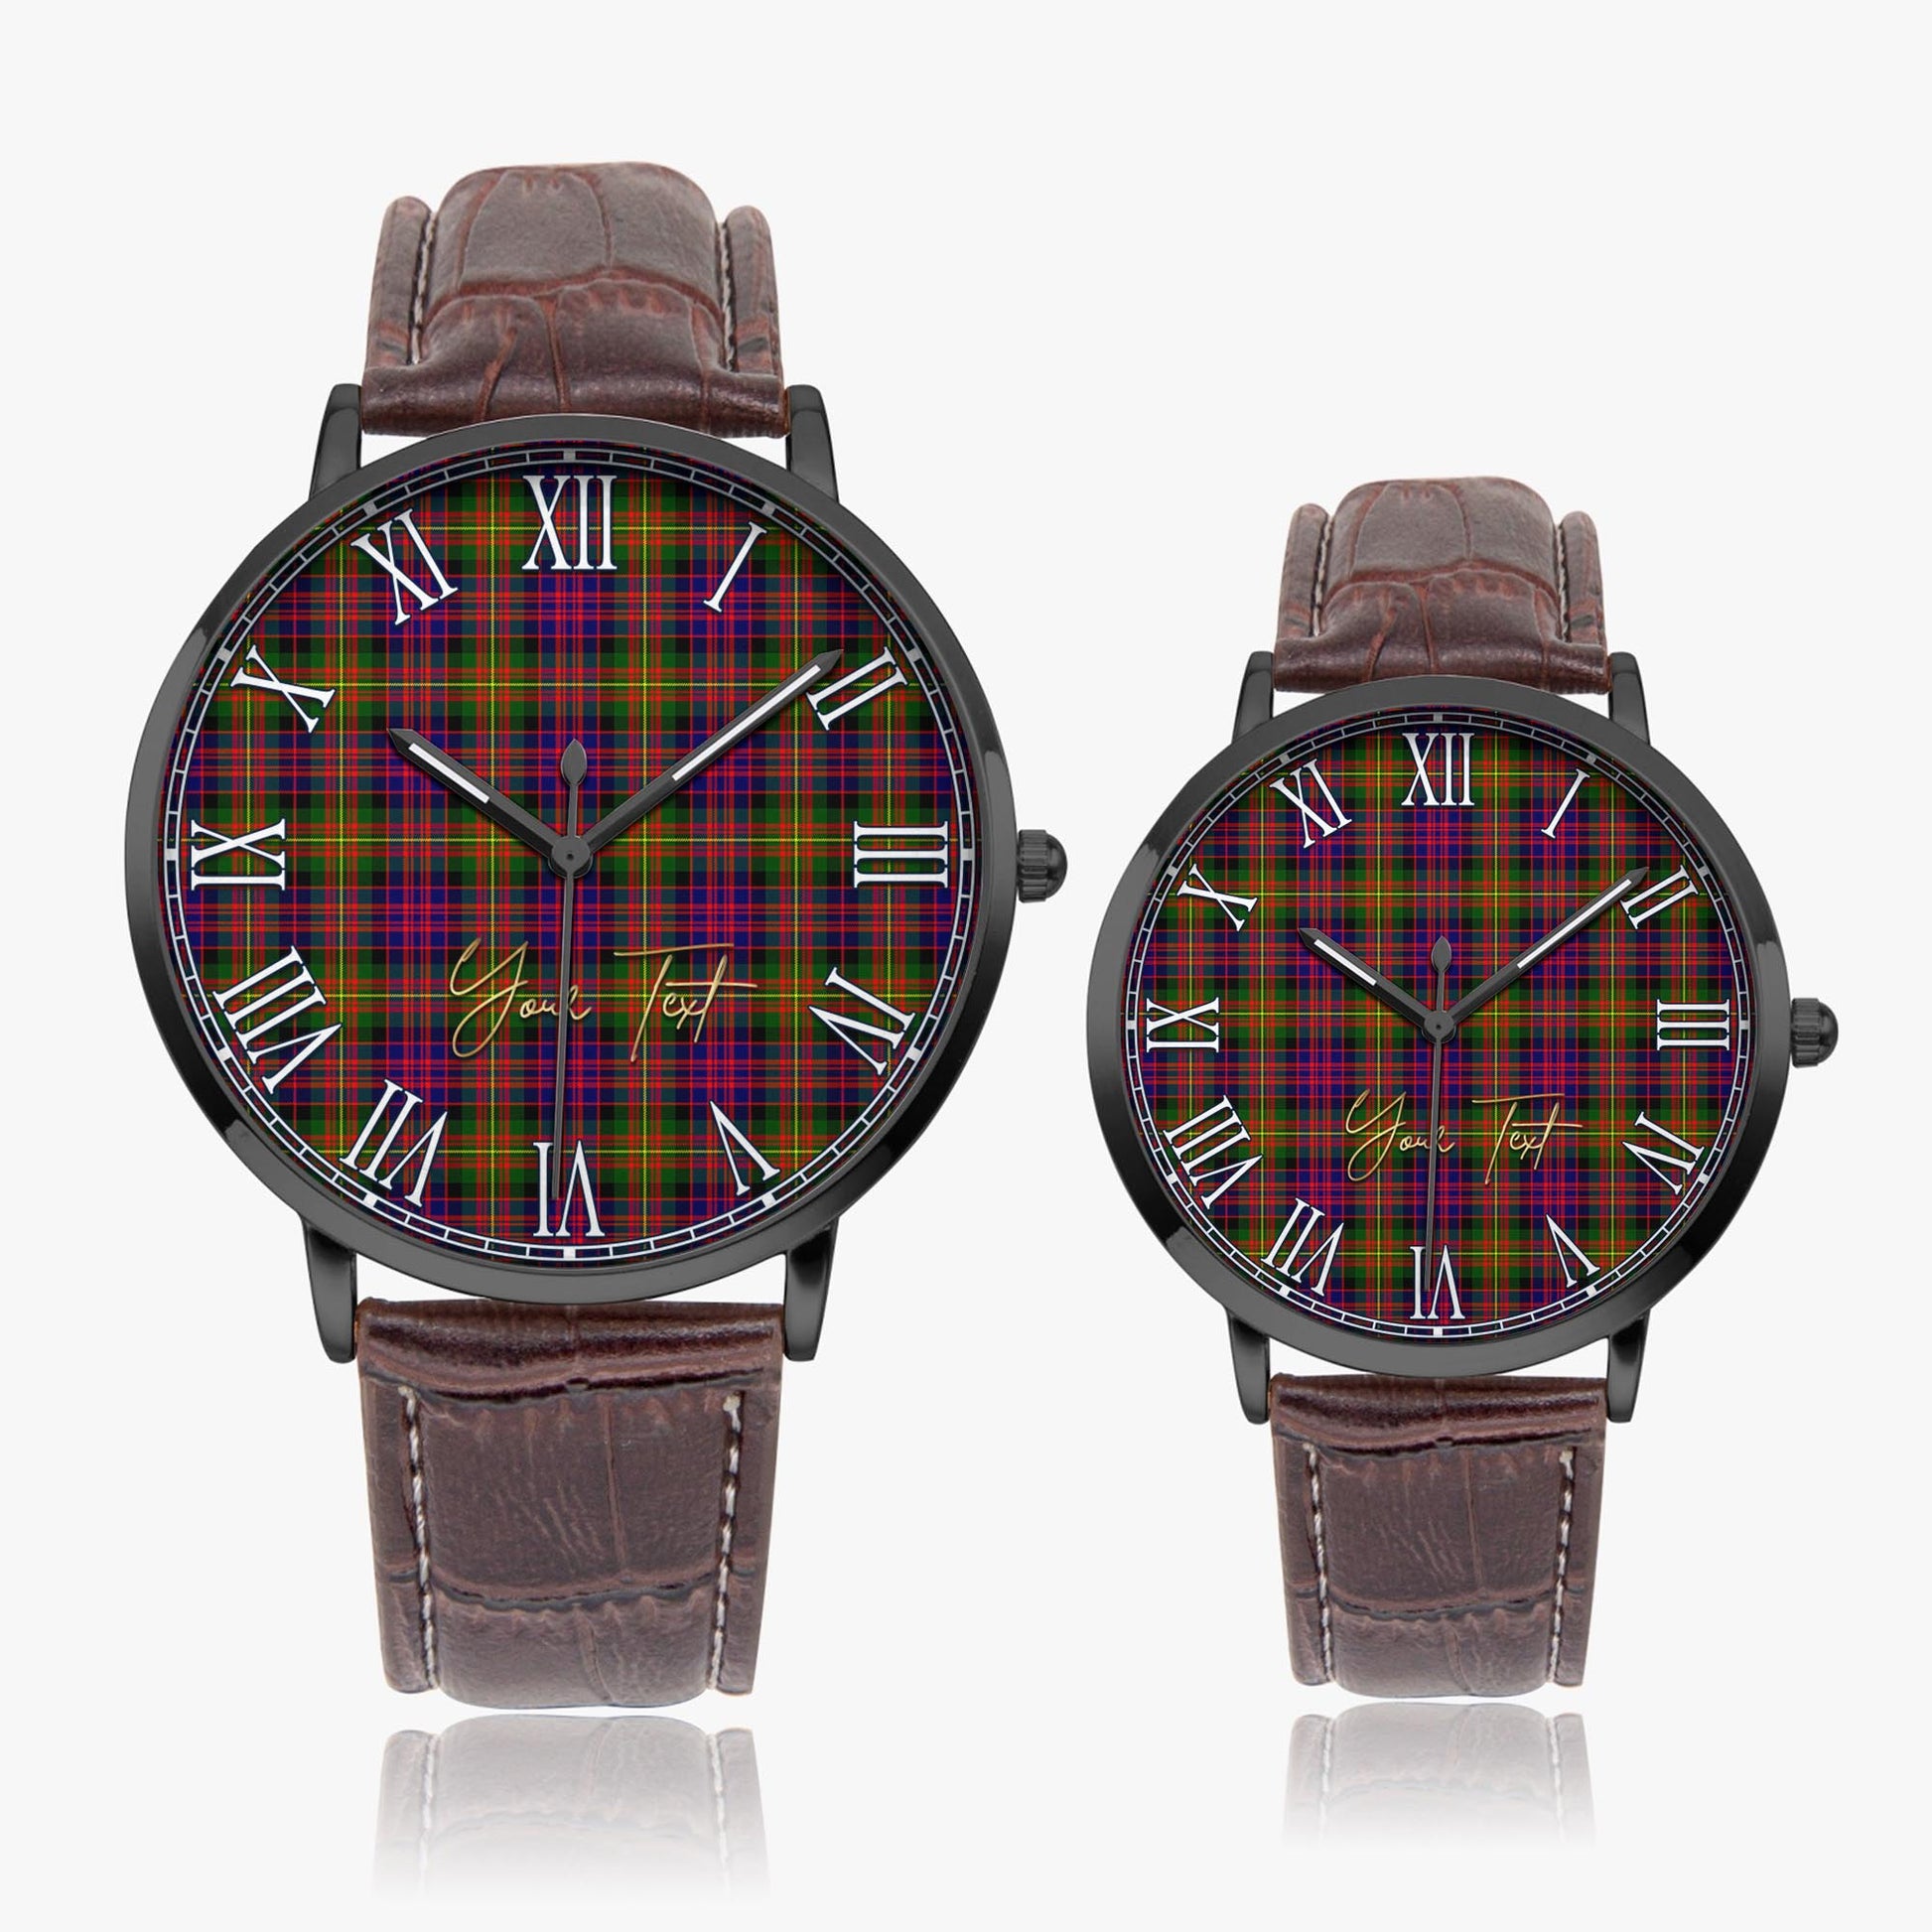 Carnegie Modern Tartan Personalized Your Text Leather Trap Quartz Watch Ultra Thin Black Case With Brown Leather Strap - Tartanvibesclothing